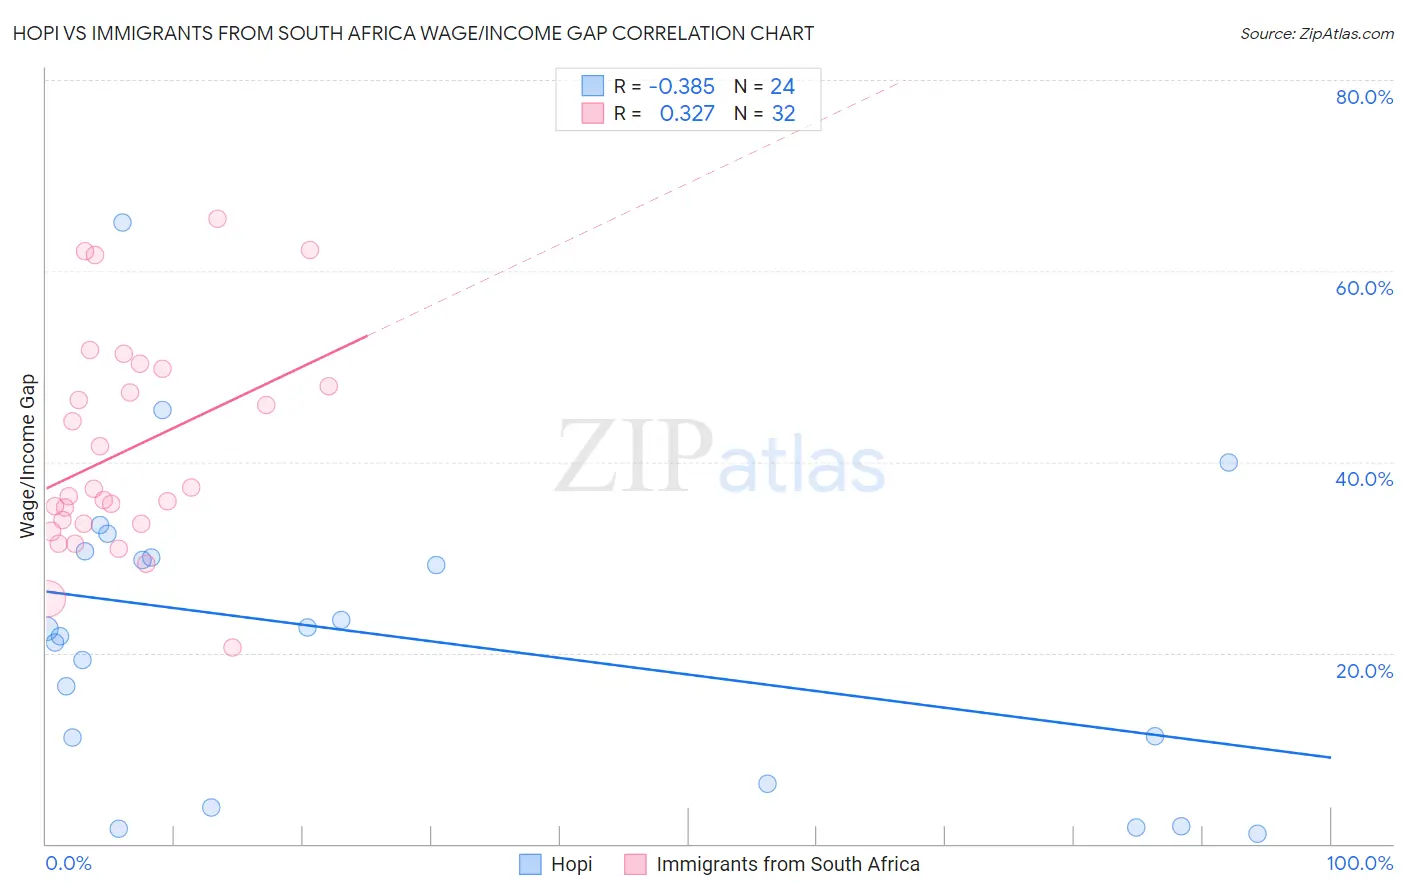 Hopi vs Immigrants from South Africa Wage/Income Gap